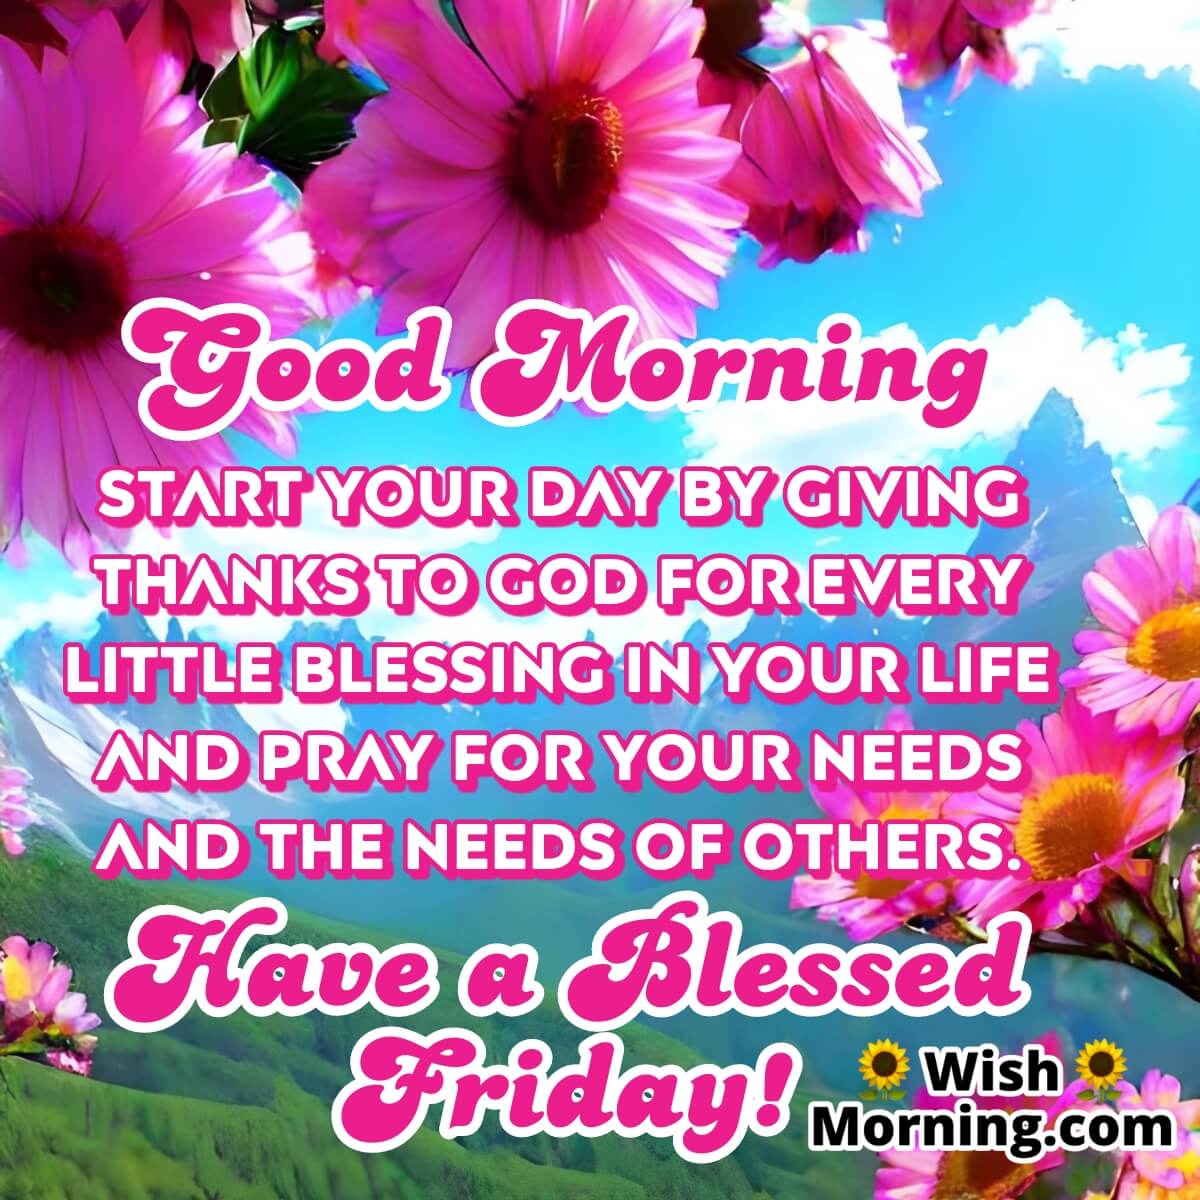 Good Morning Have A Blessed Friday